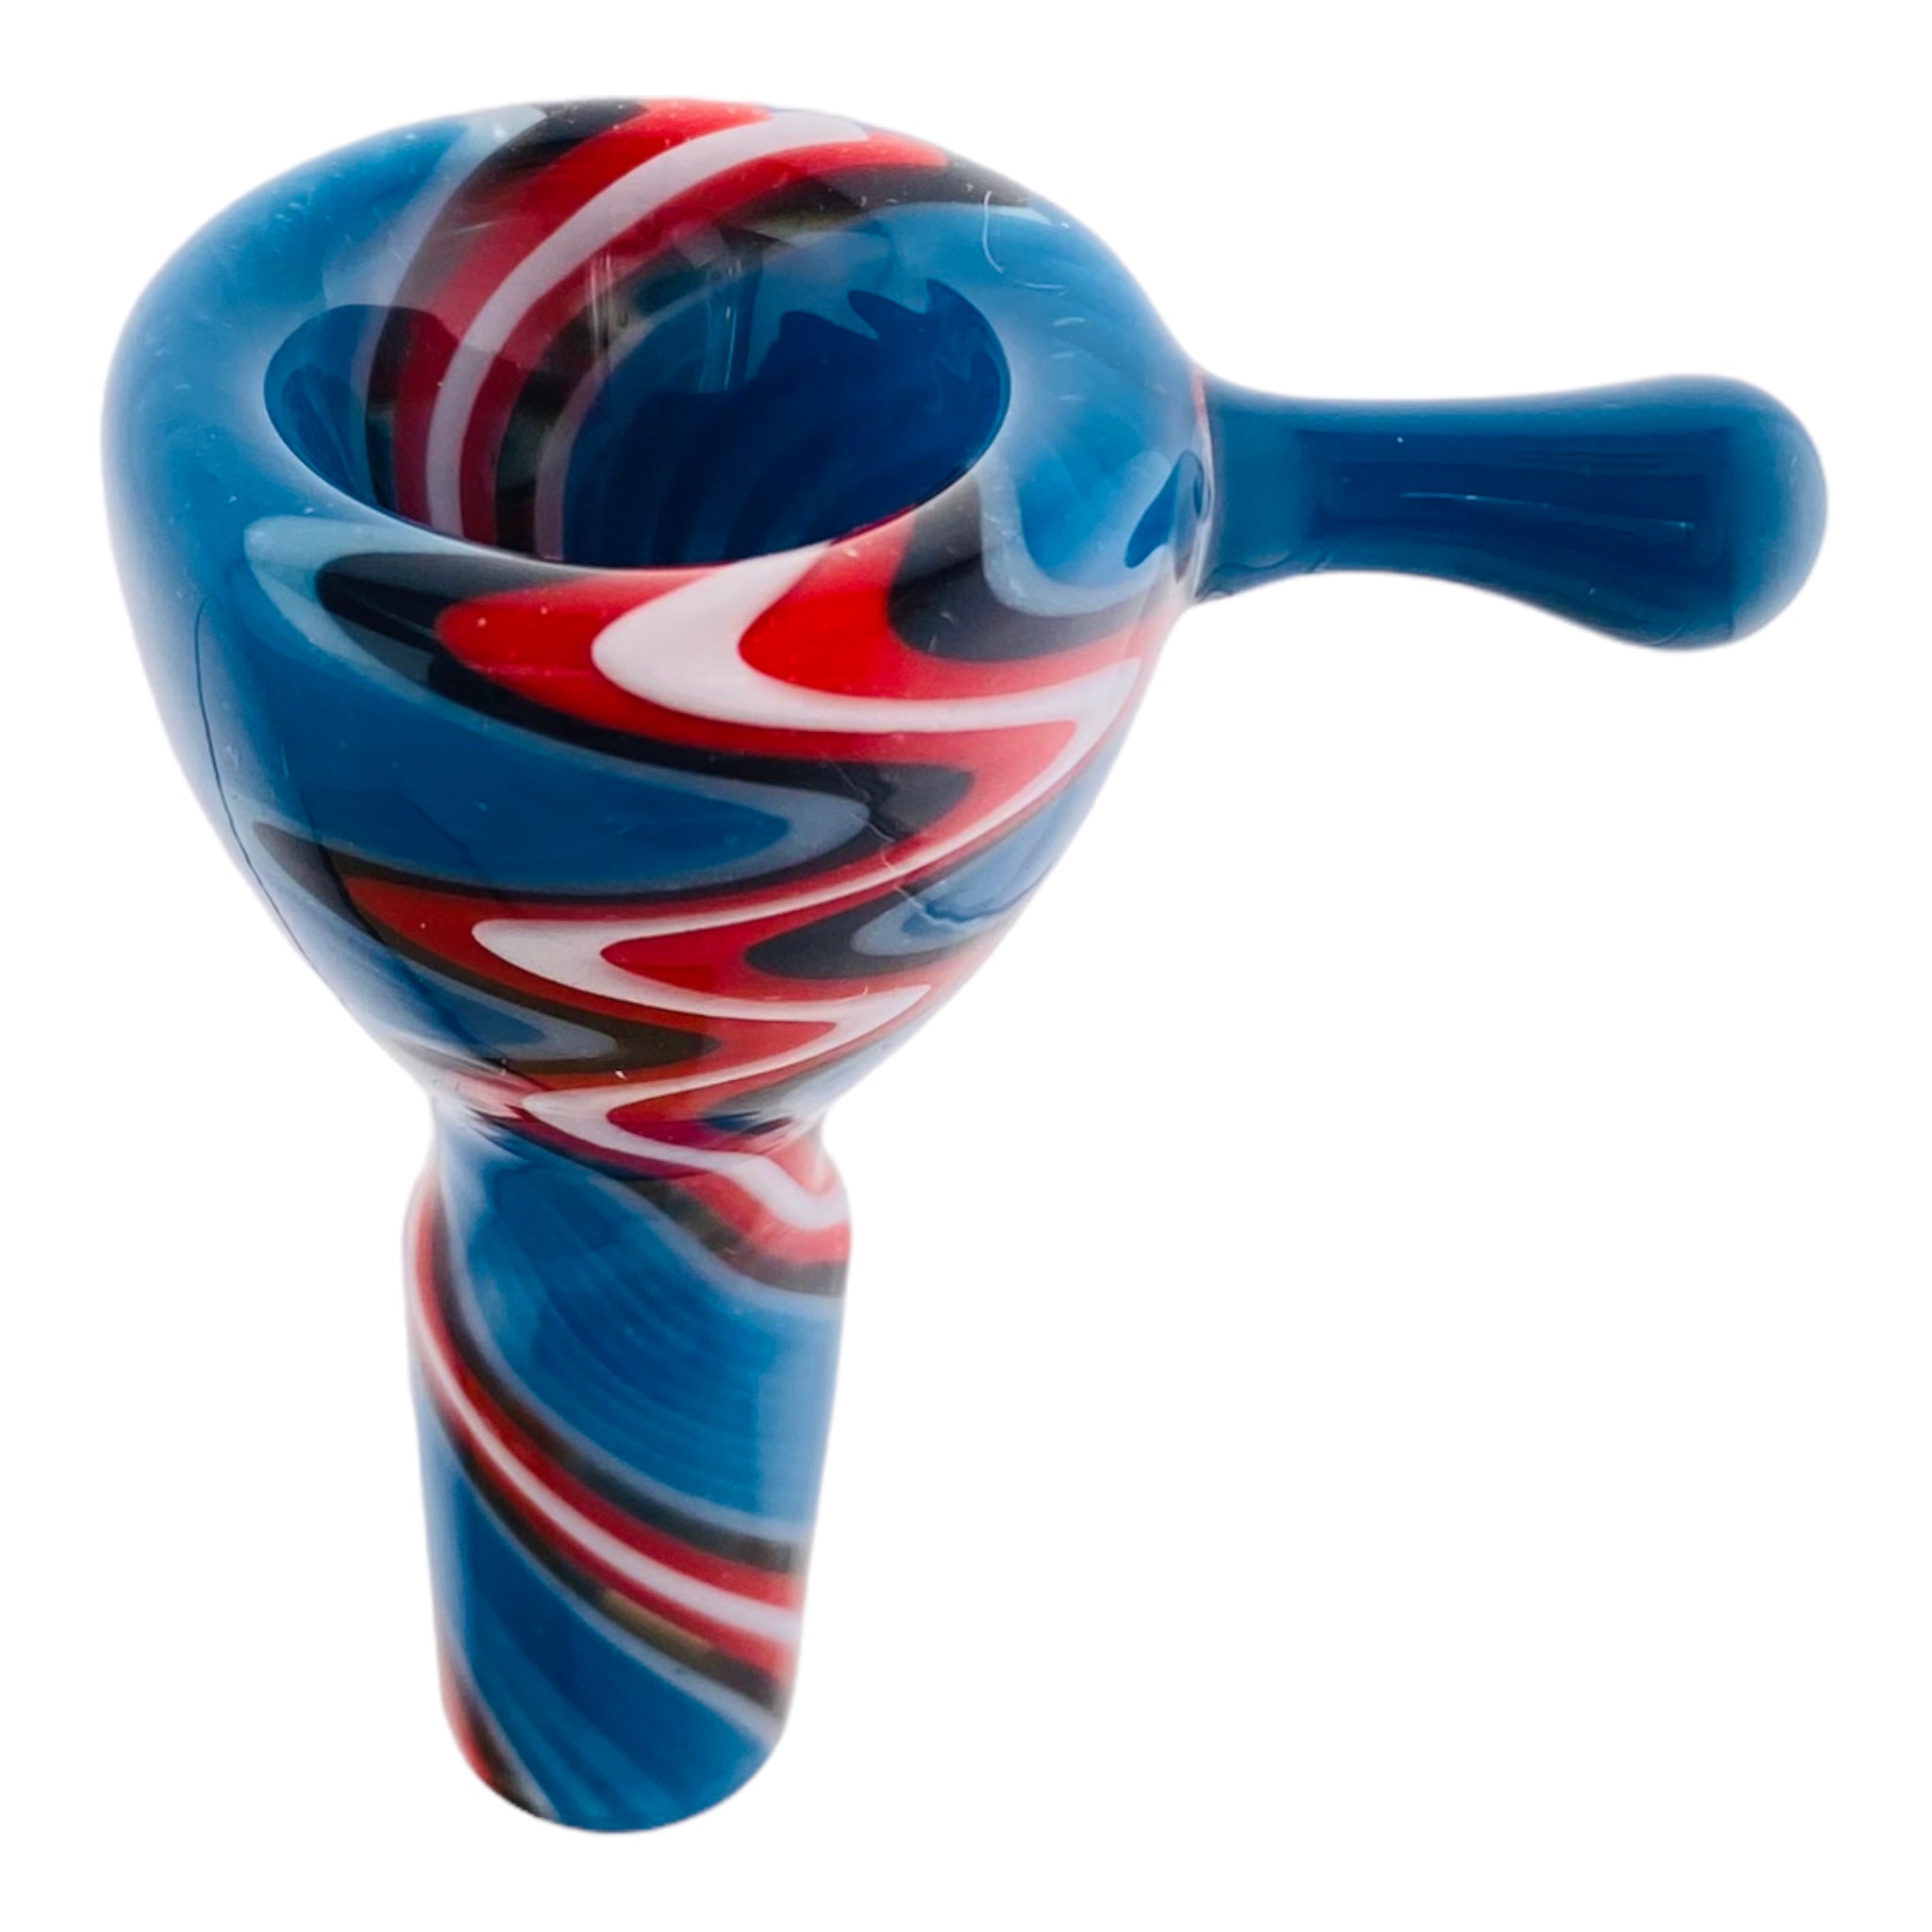 14mm Flower Bowl - Full Color Blue & Red Wig Wag Bong Bowl Piece